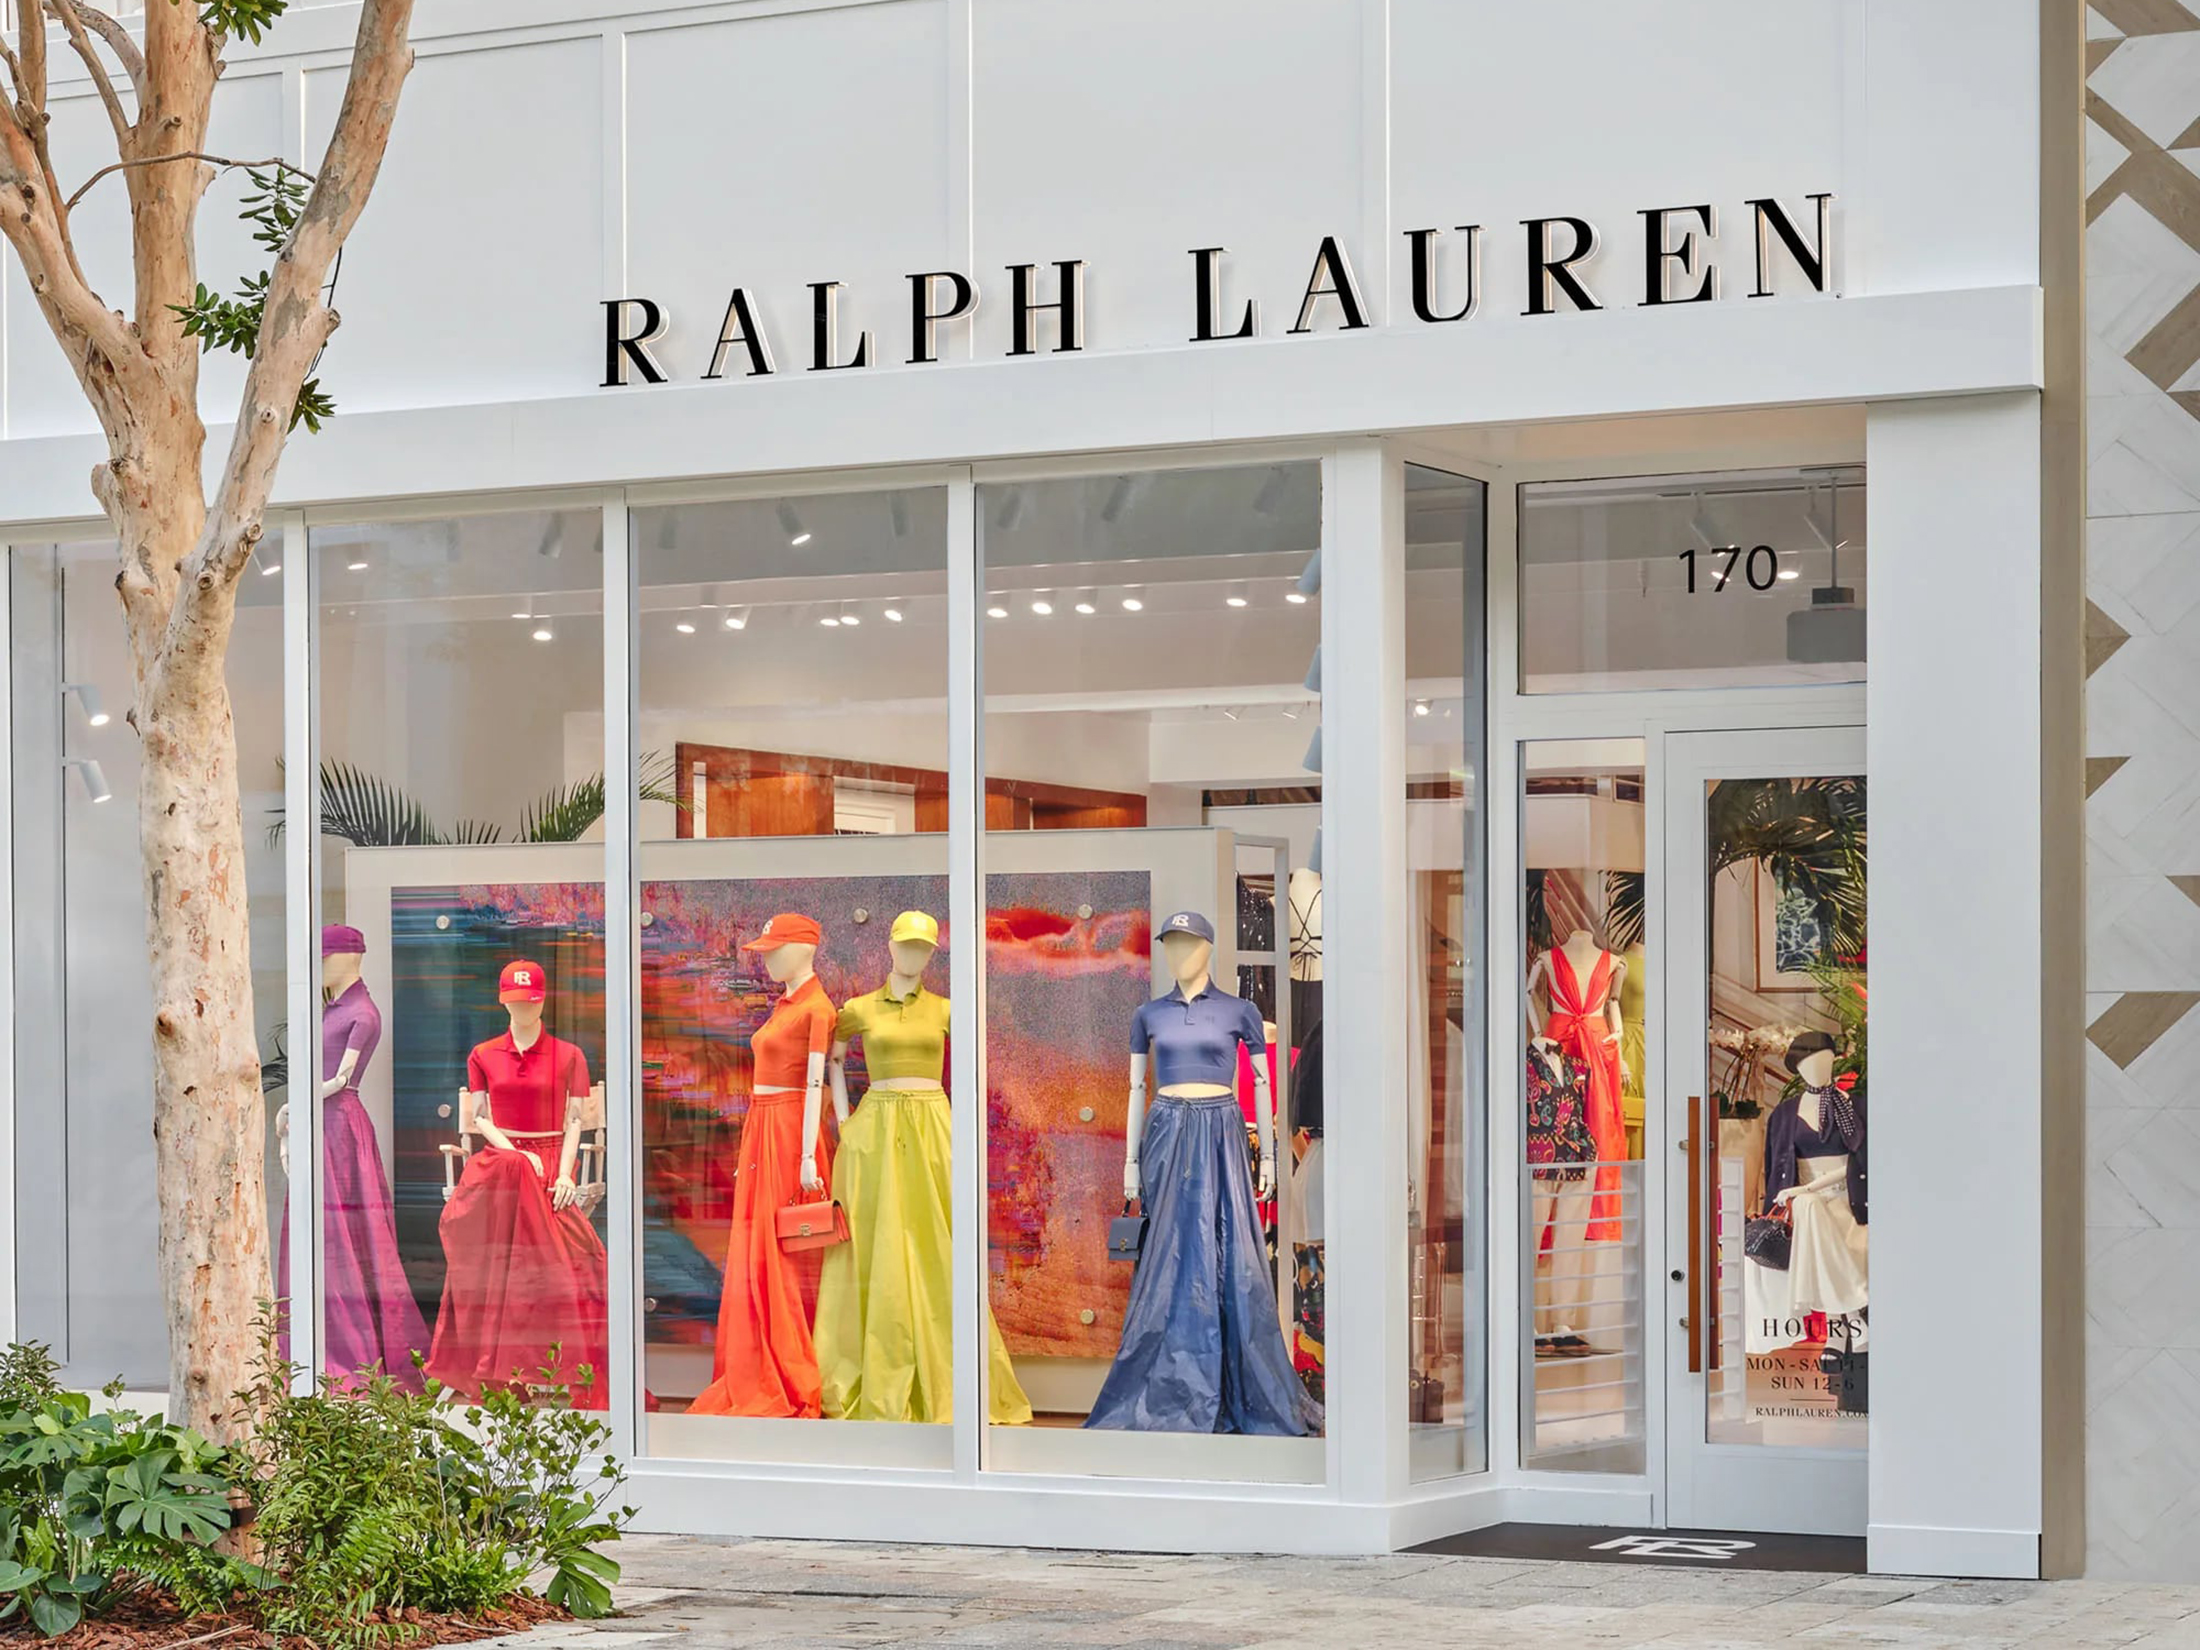 Ralph Lauren unveiled his latest collection at the Museum of